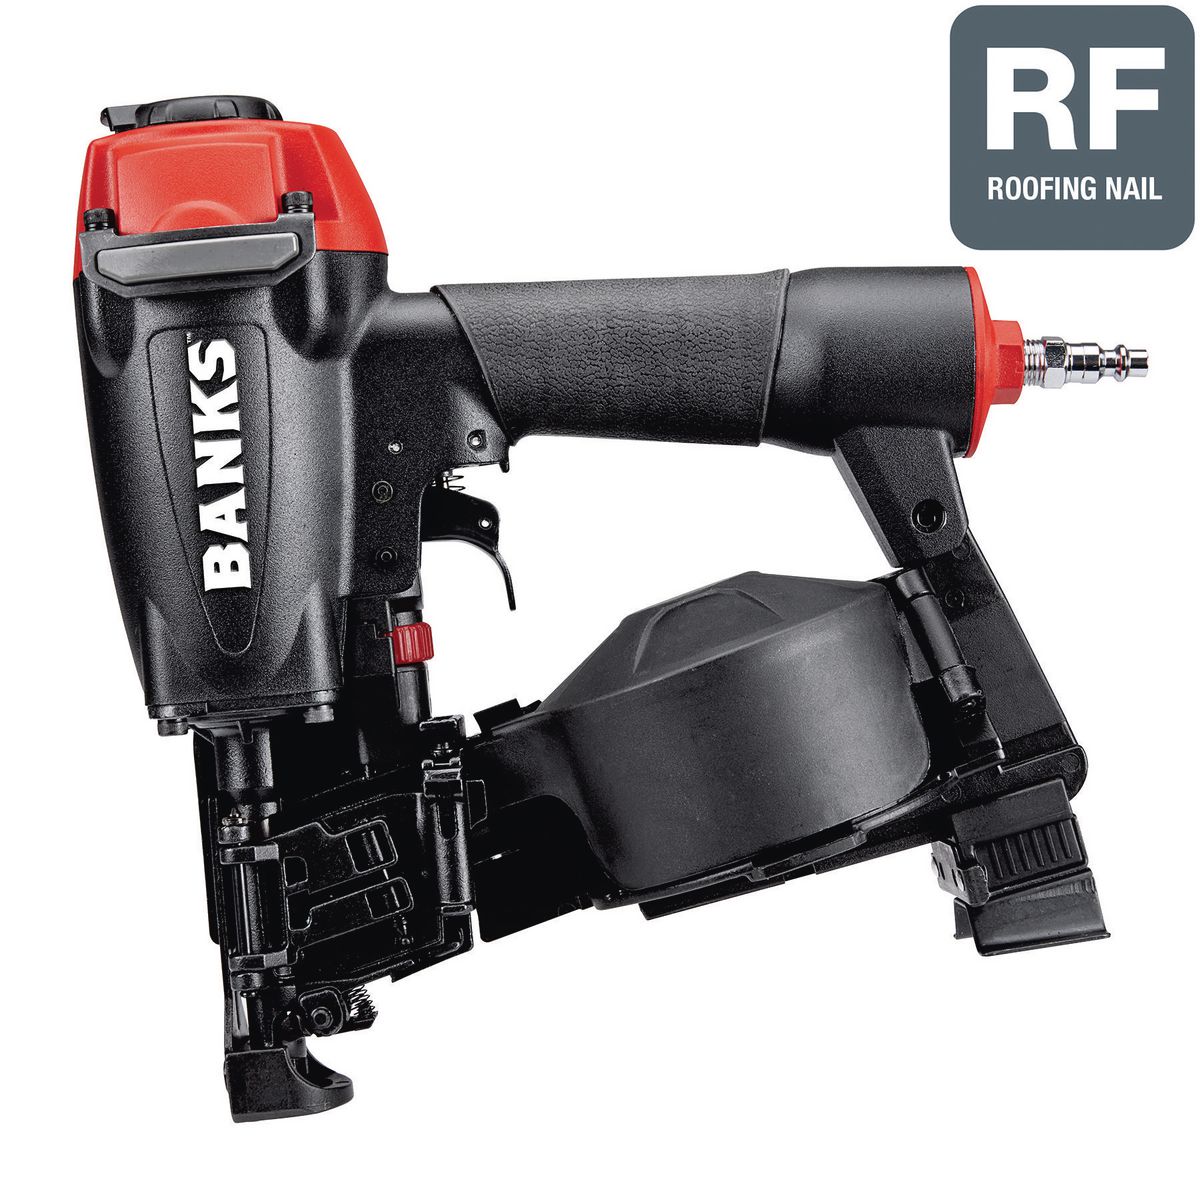 BANKS 15° Coil Roofing Nailer – Item 63993 – Harbor Freight Coupons